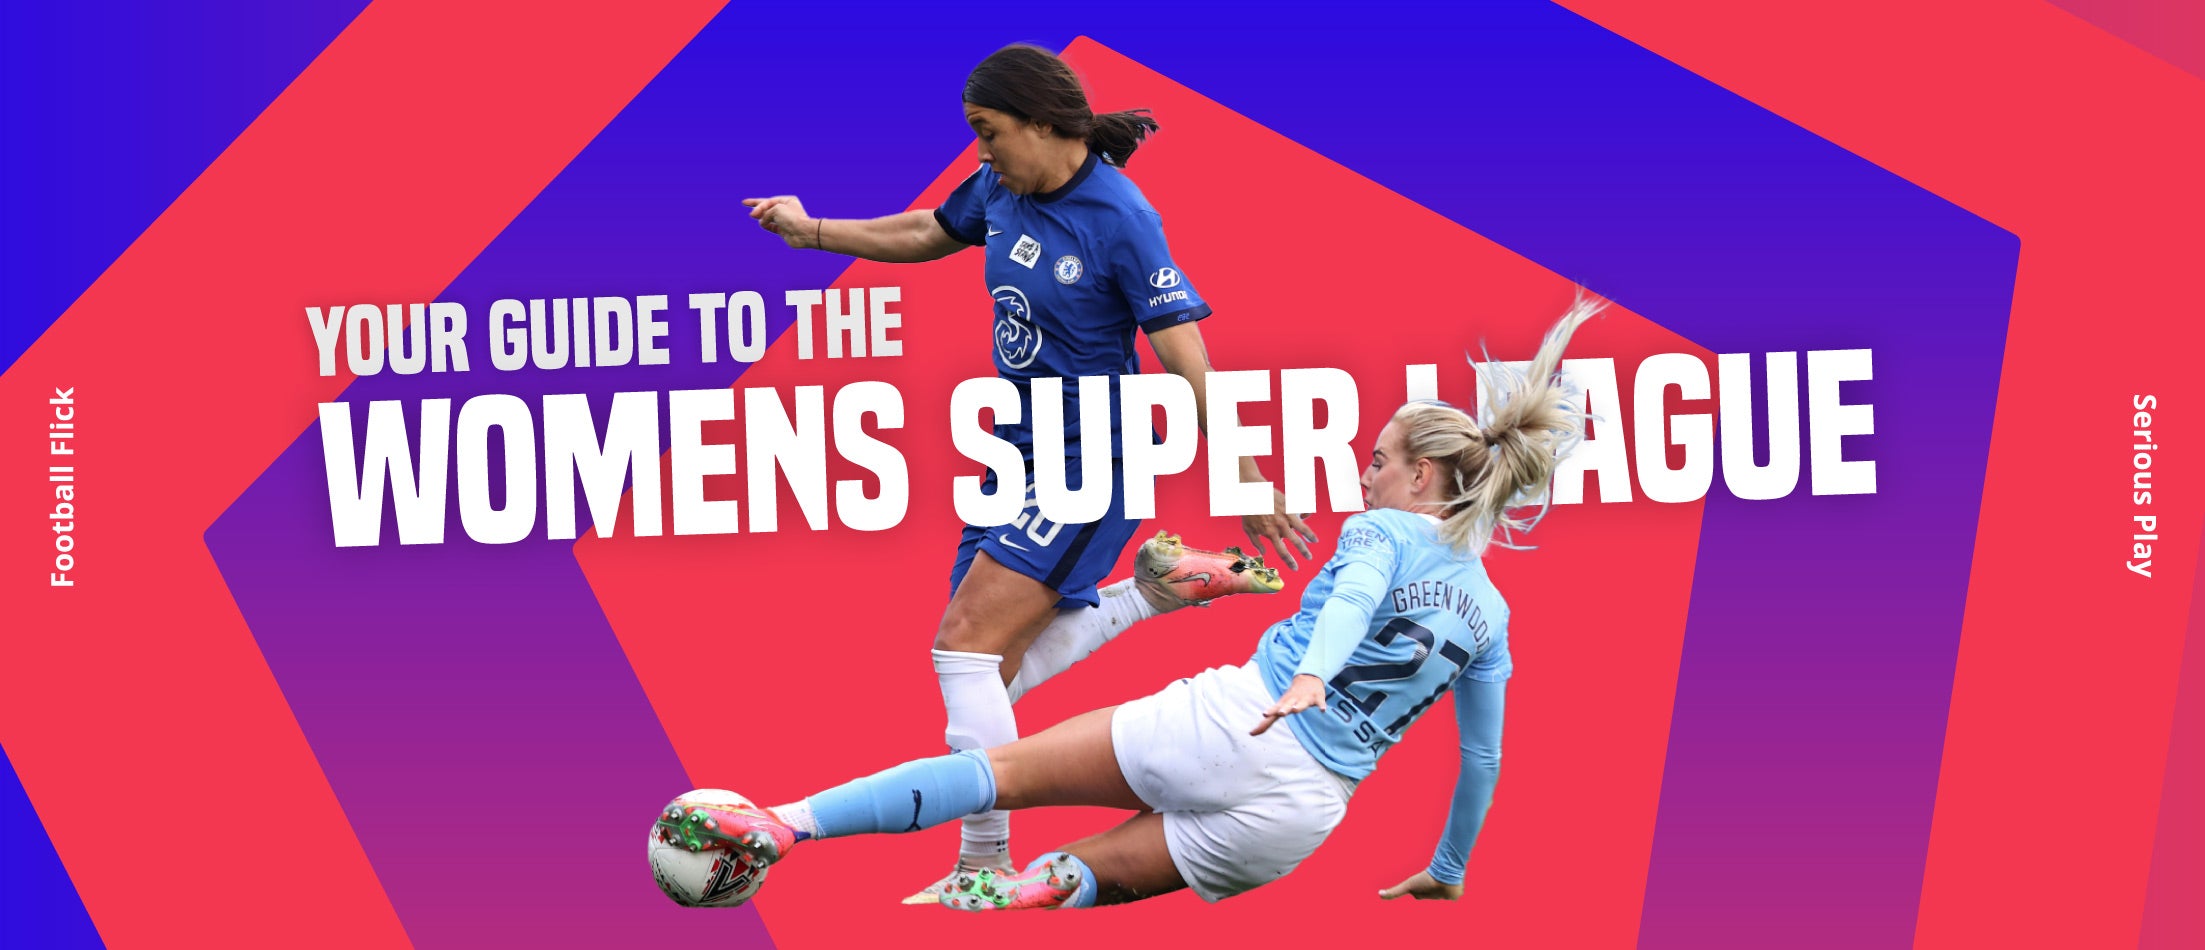 Guide to the Women's Super League